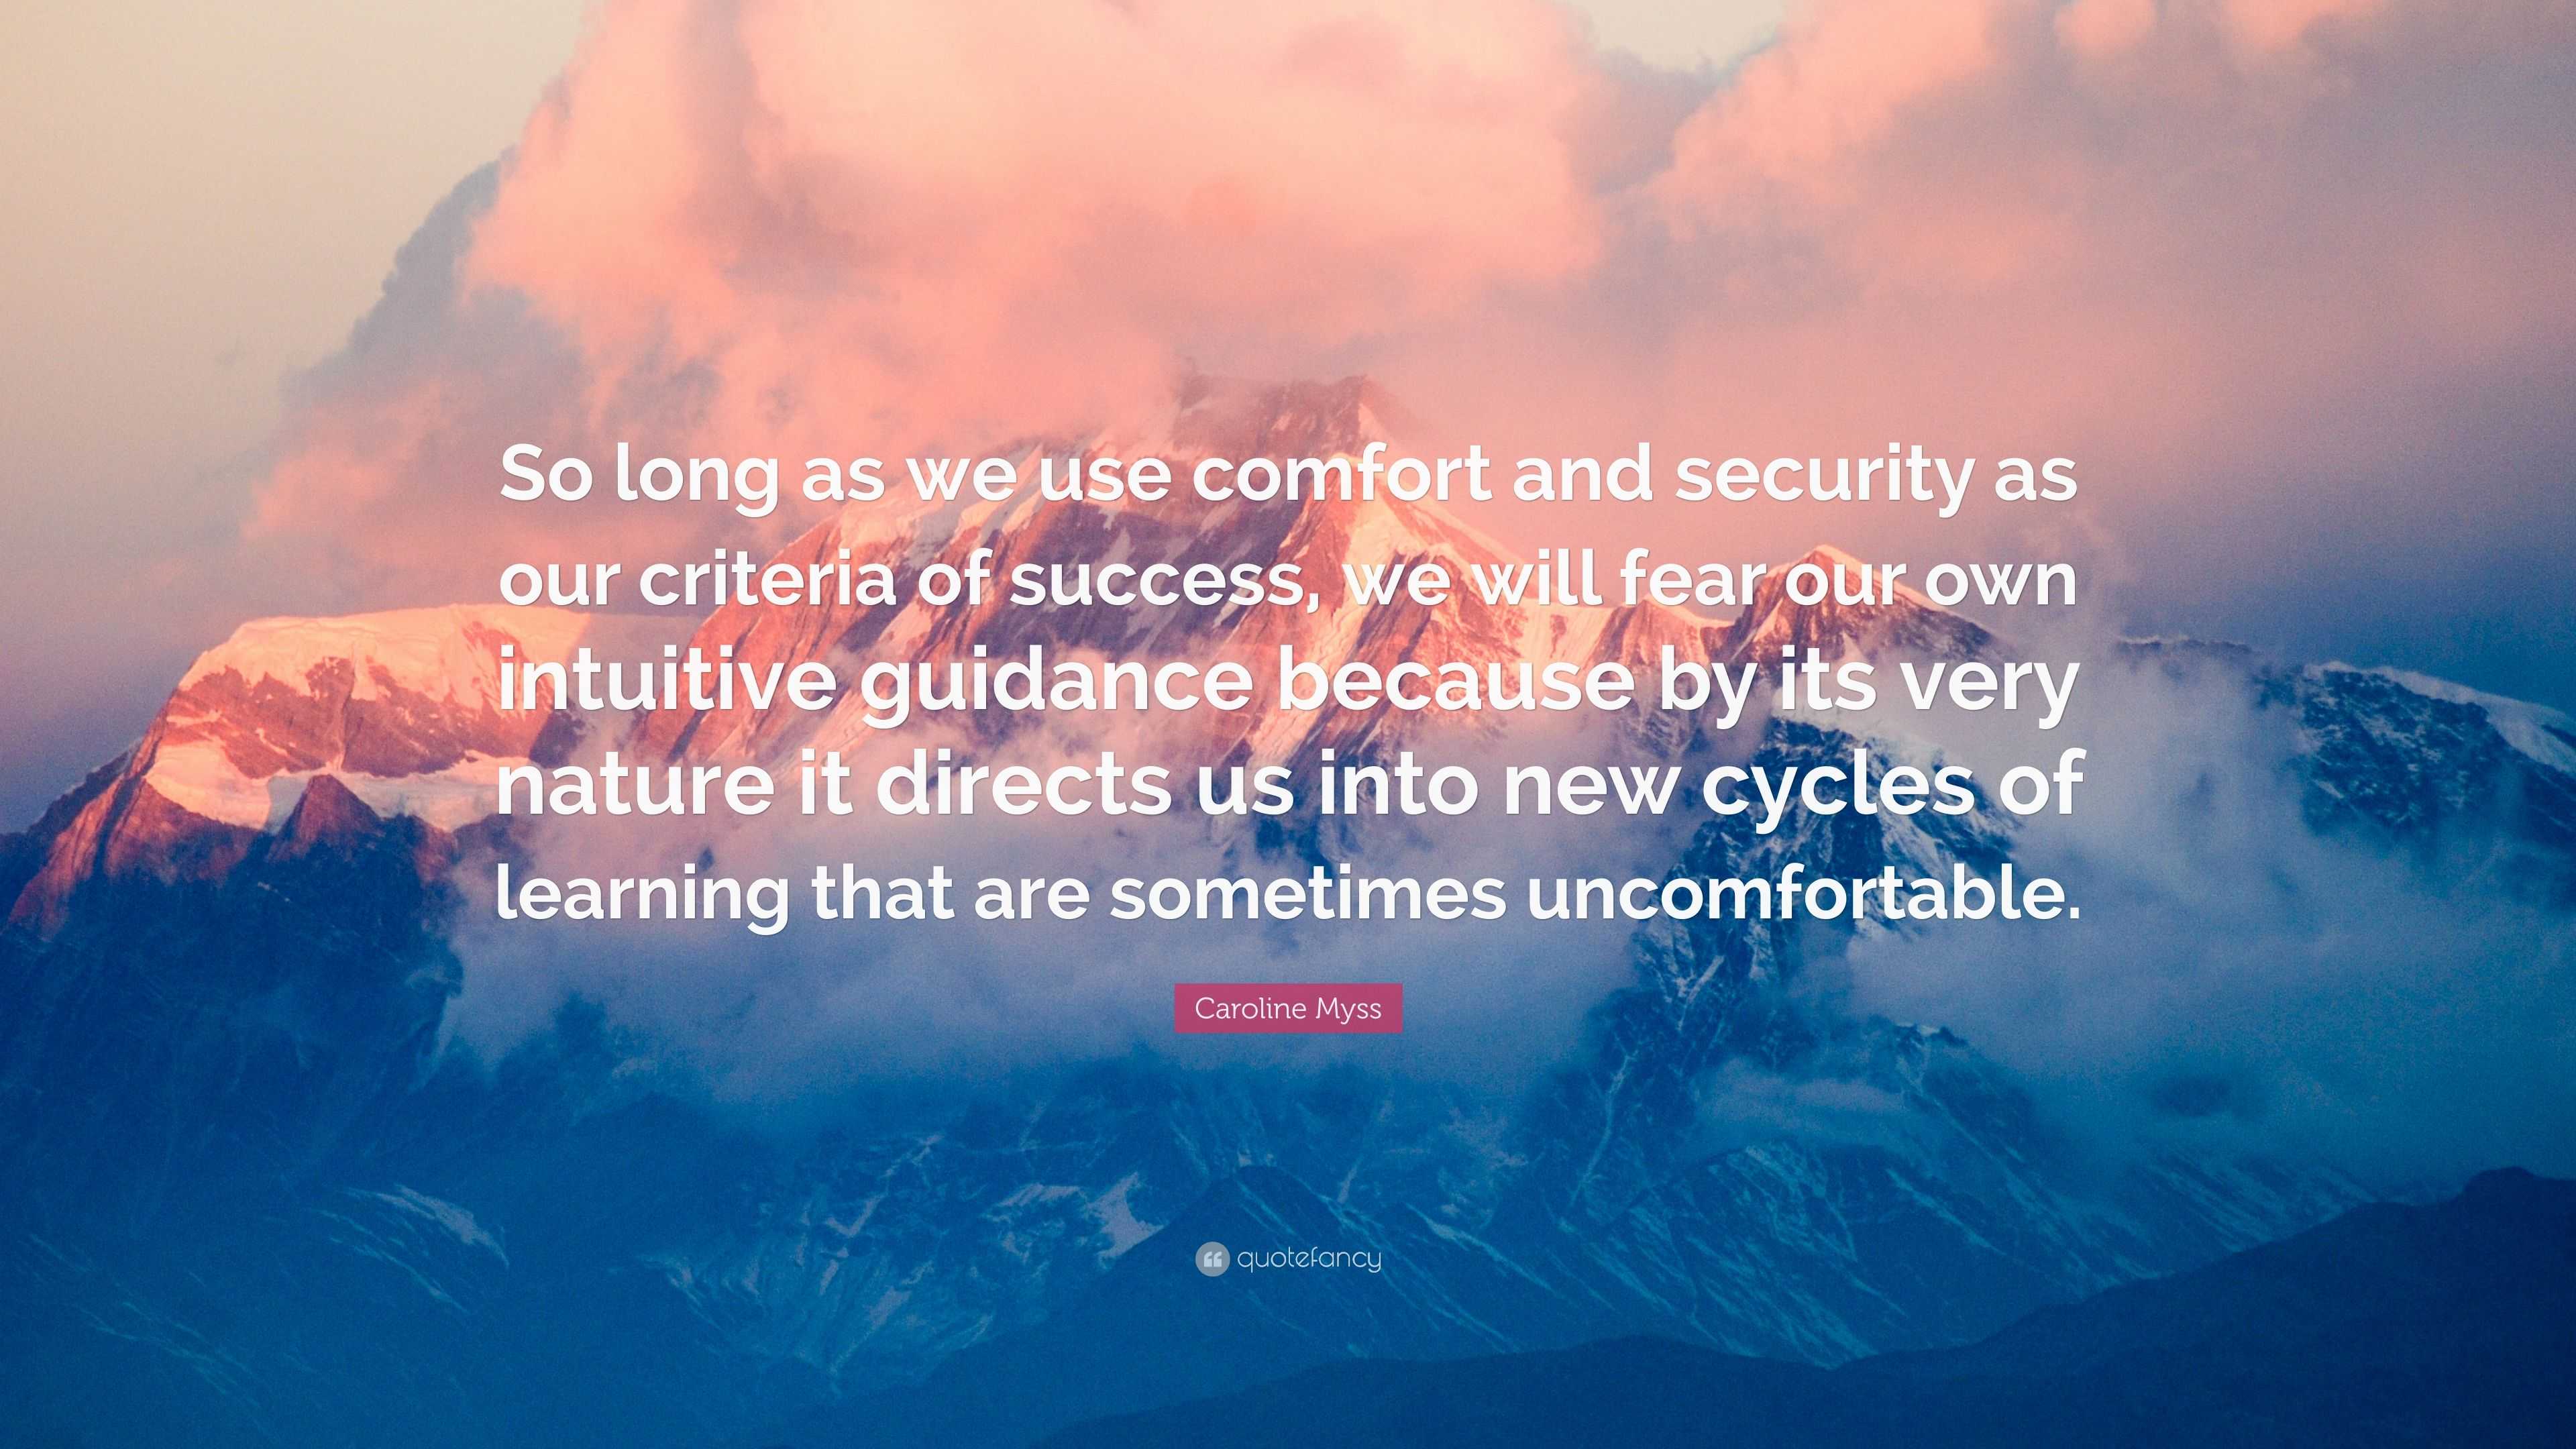 Caroline Myss Quote: “So long as we use comfort and security as our ...